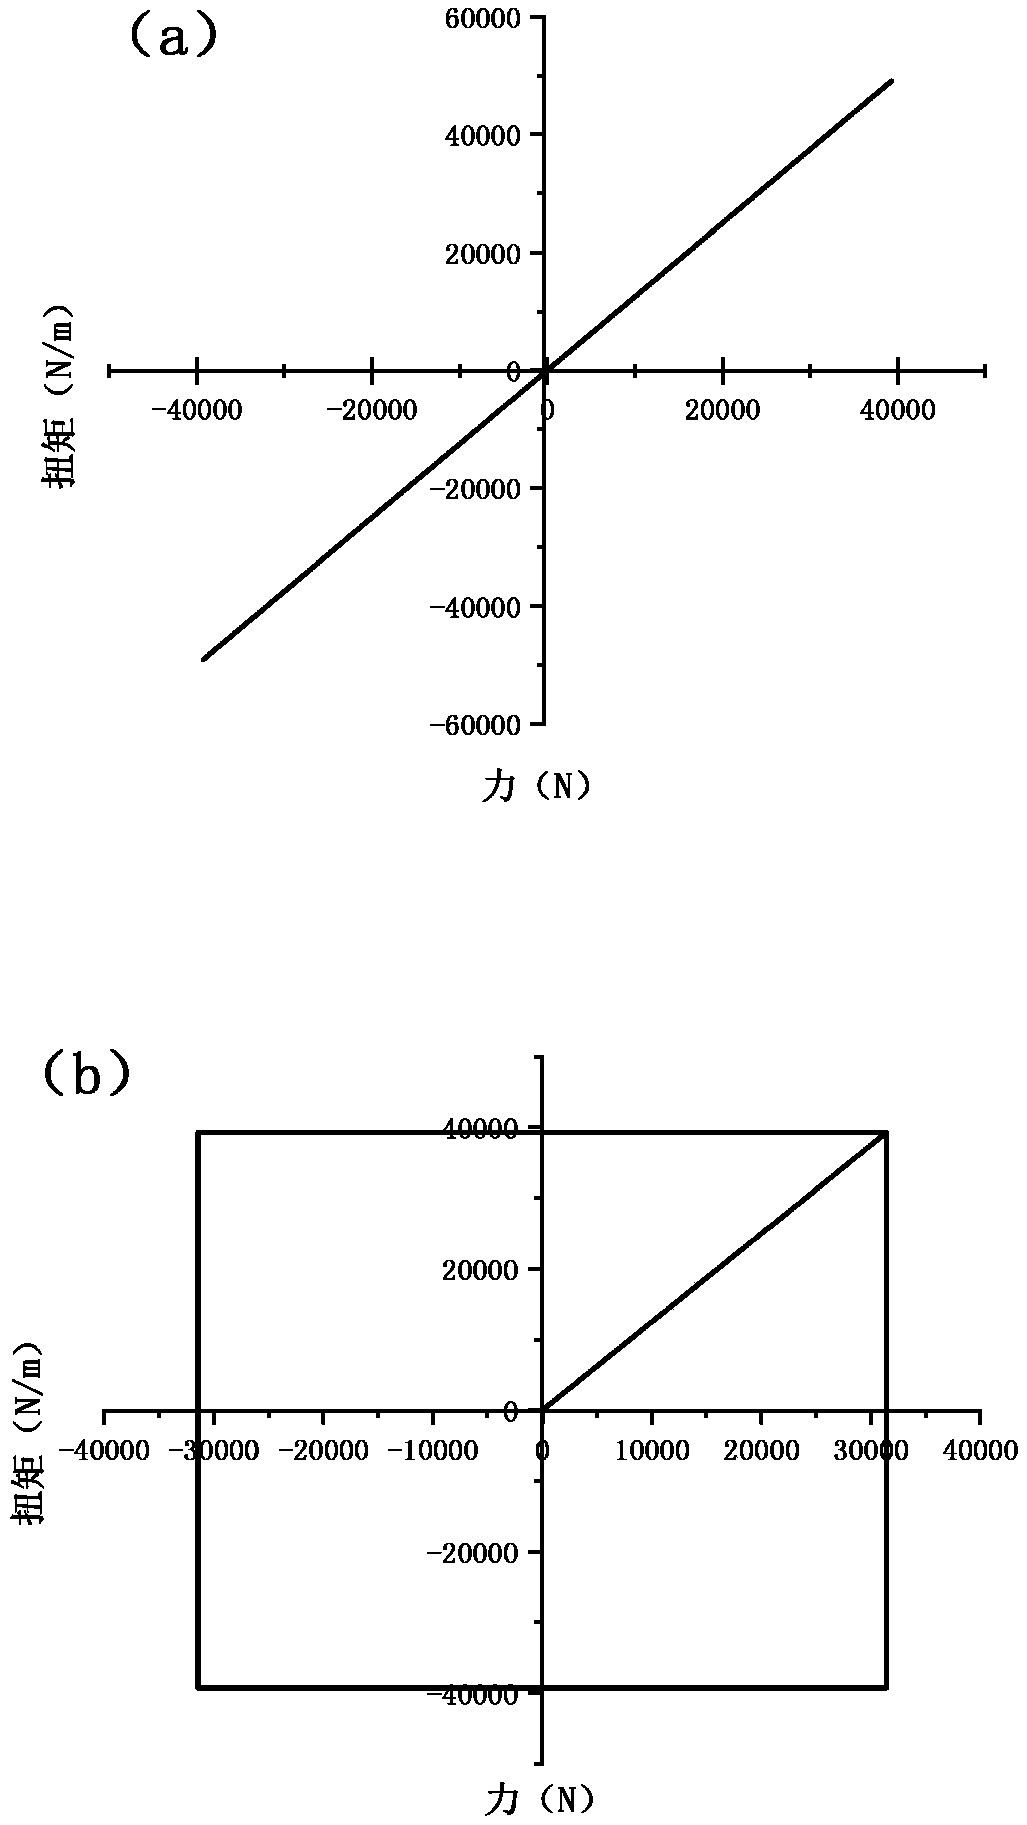 A notch part local stress-strain calculation method under a high-temperature multi-axis load